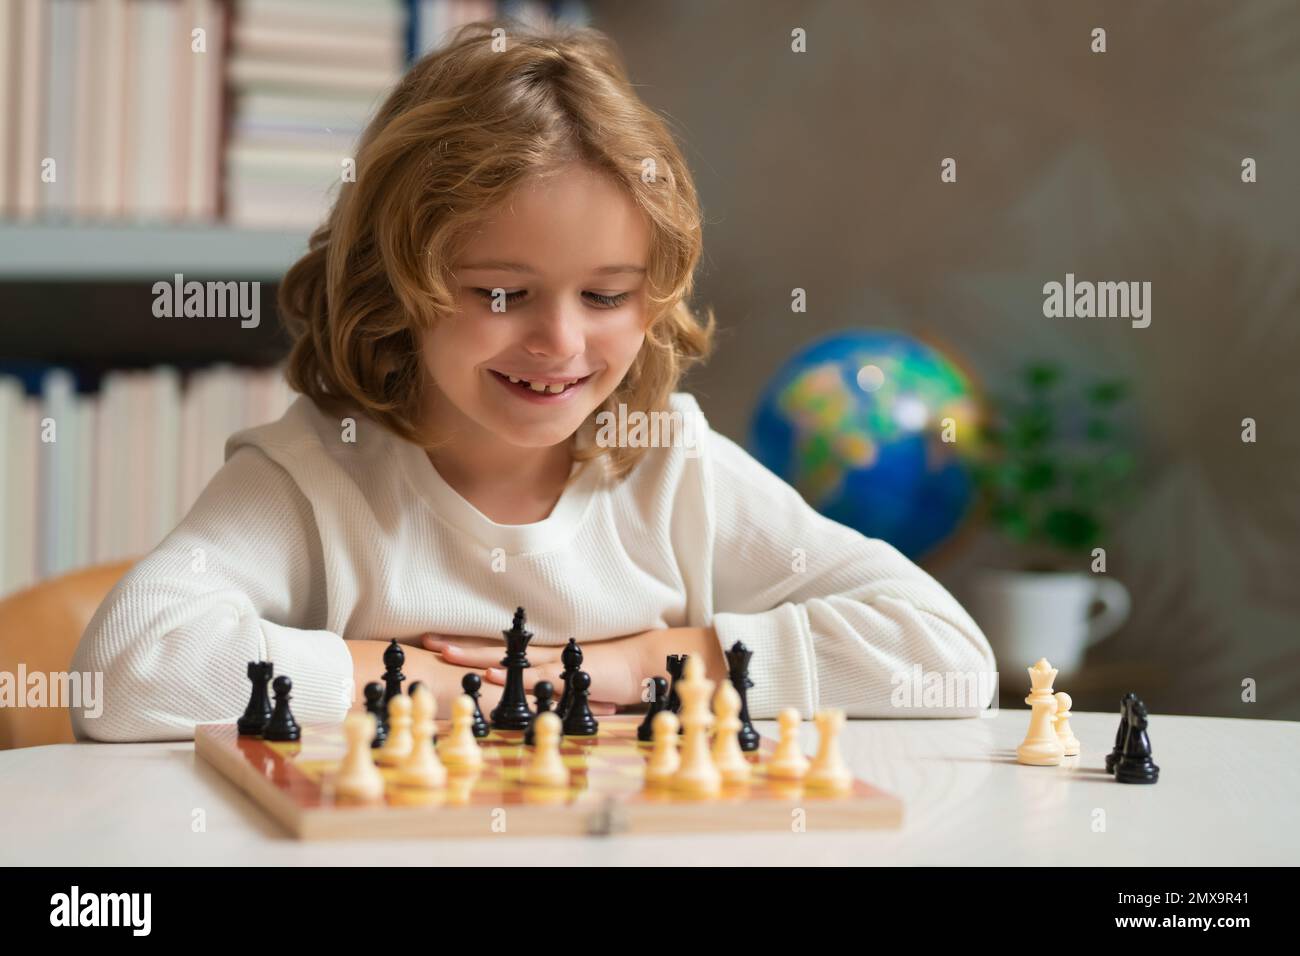 Chess game for children. Kid playing chess. Games and activities for children Stock Photo